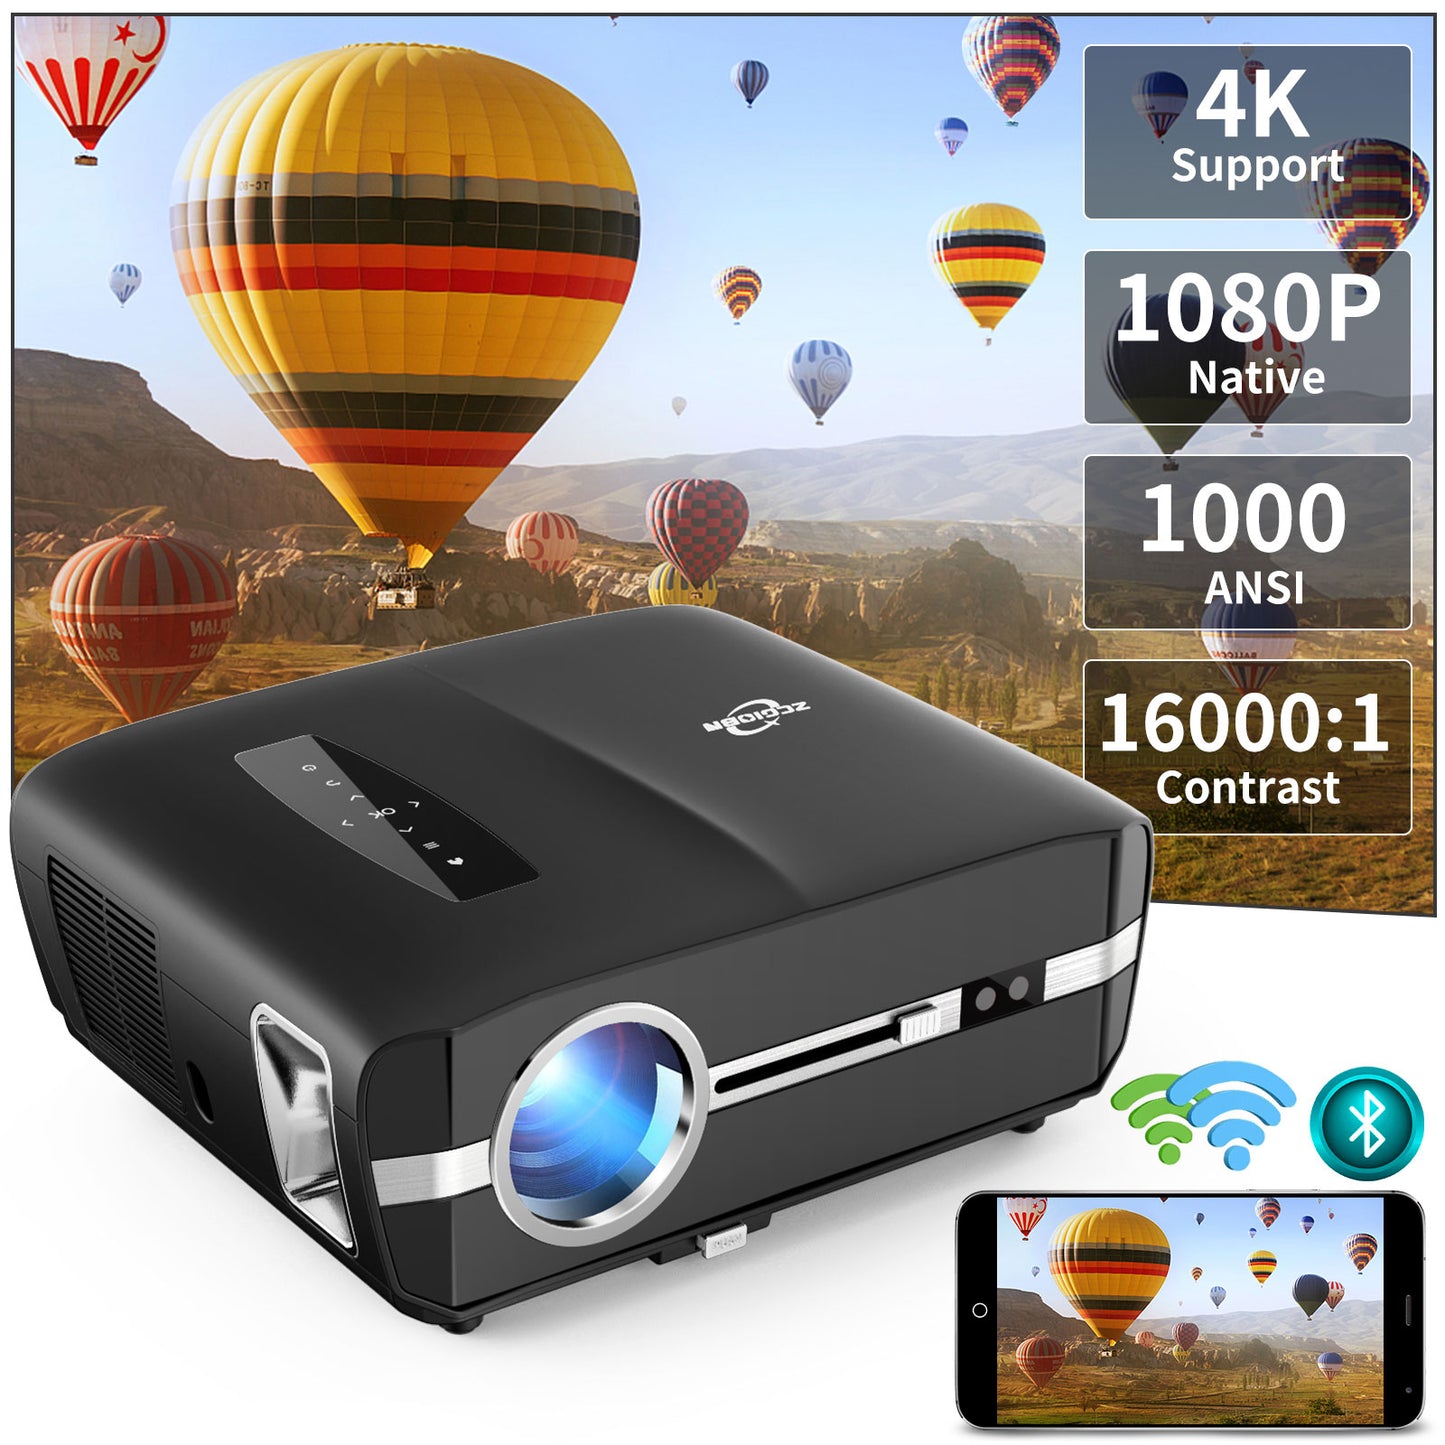 ZCGIOBN New Upgraded High Brightness Video Projector 1000ANSI Lumen,Native 1080P 5G Wifi Bluetooth Projector Support 4K HDR10,Full HD Movie LED Overhead Projector for iOS Android Phone TV Box Laptop Home&Business